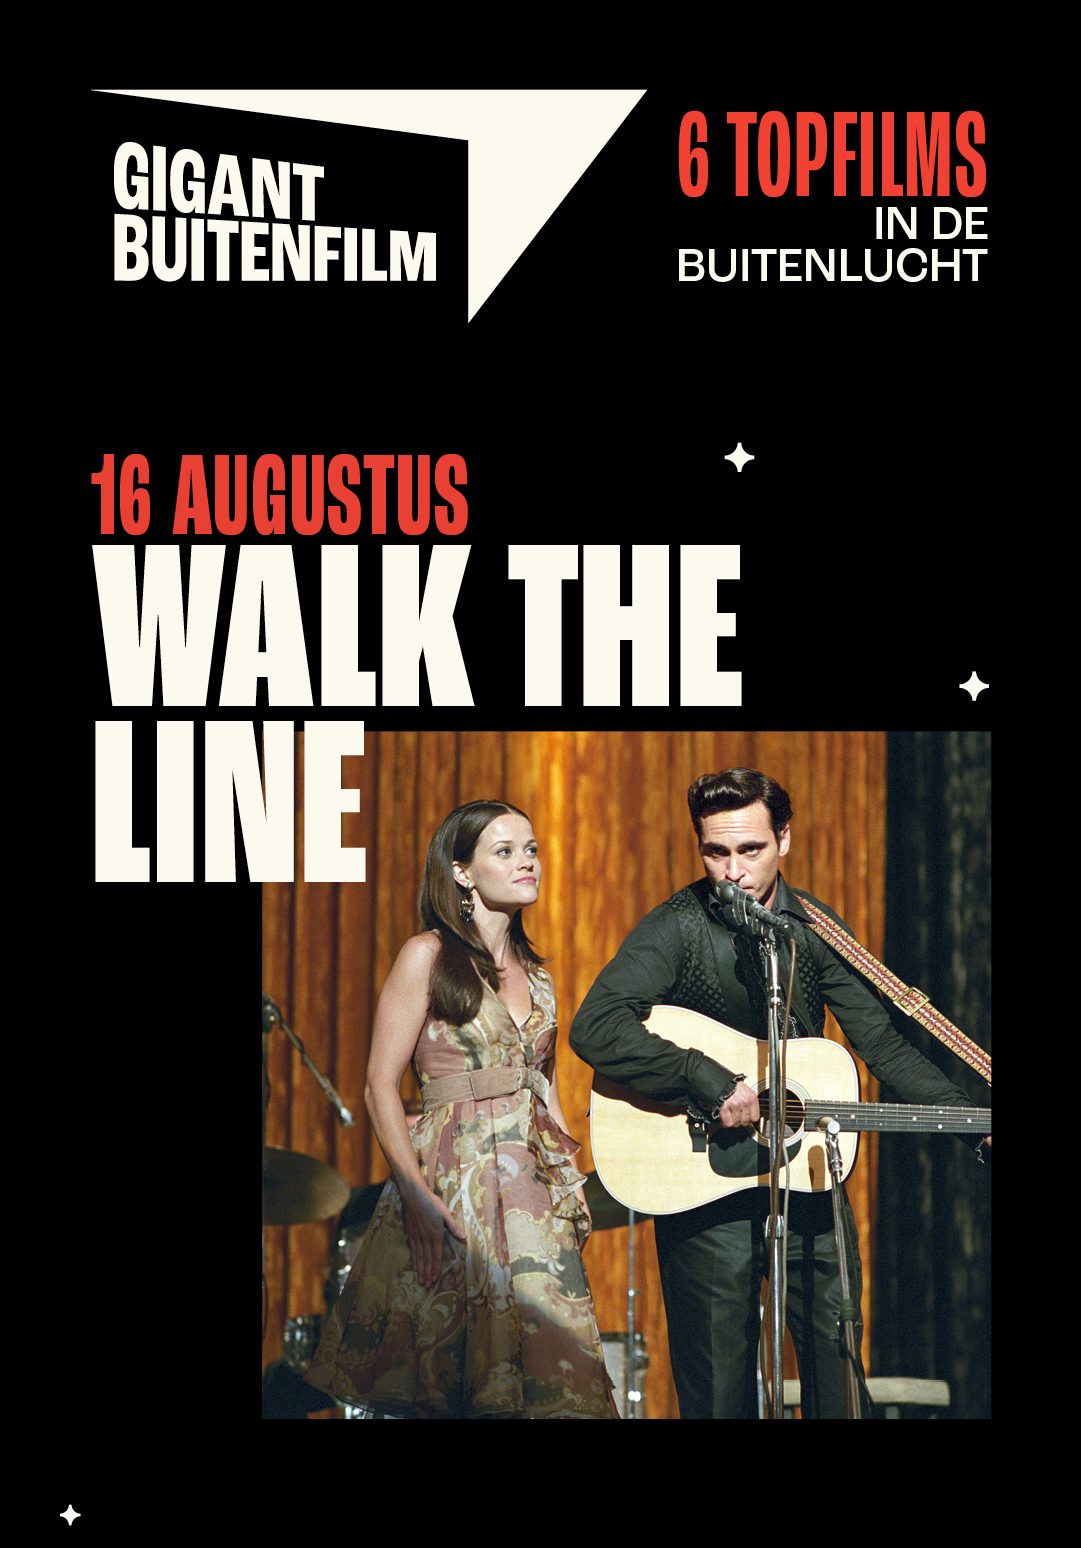 Buitenfilm: Walk The Line